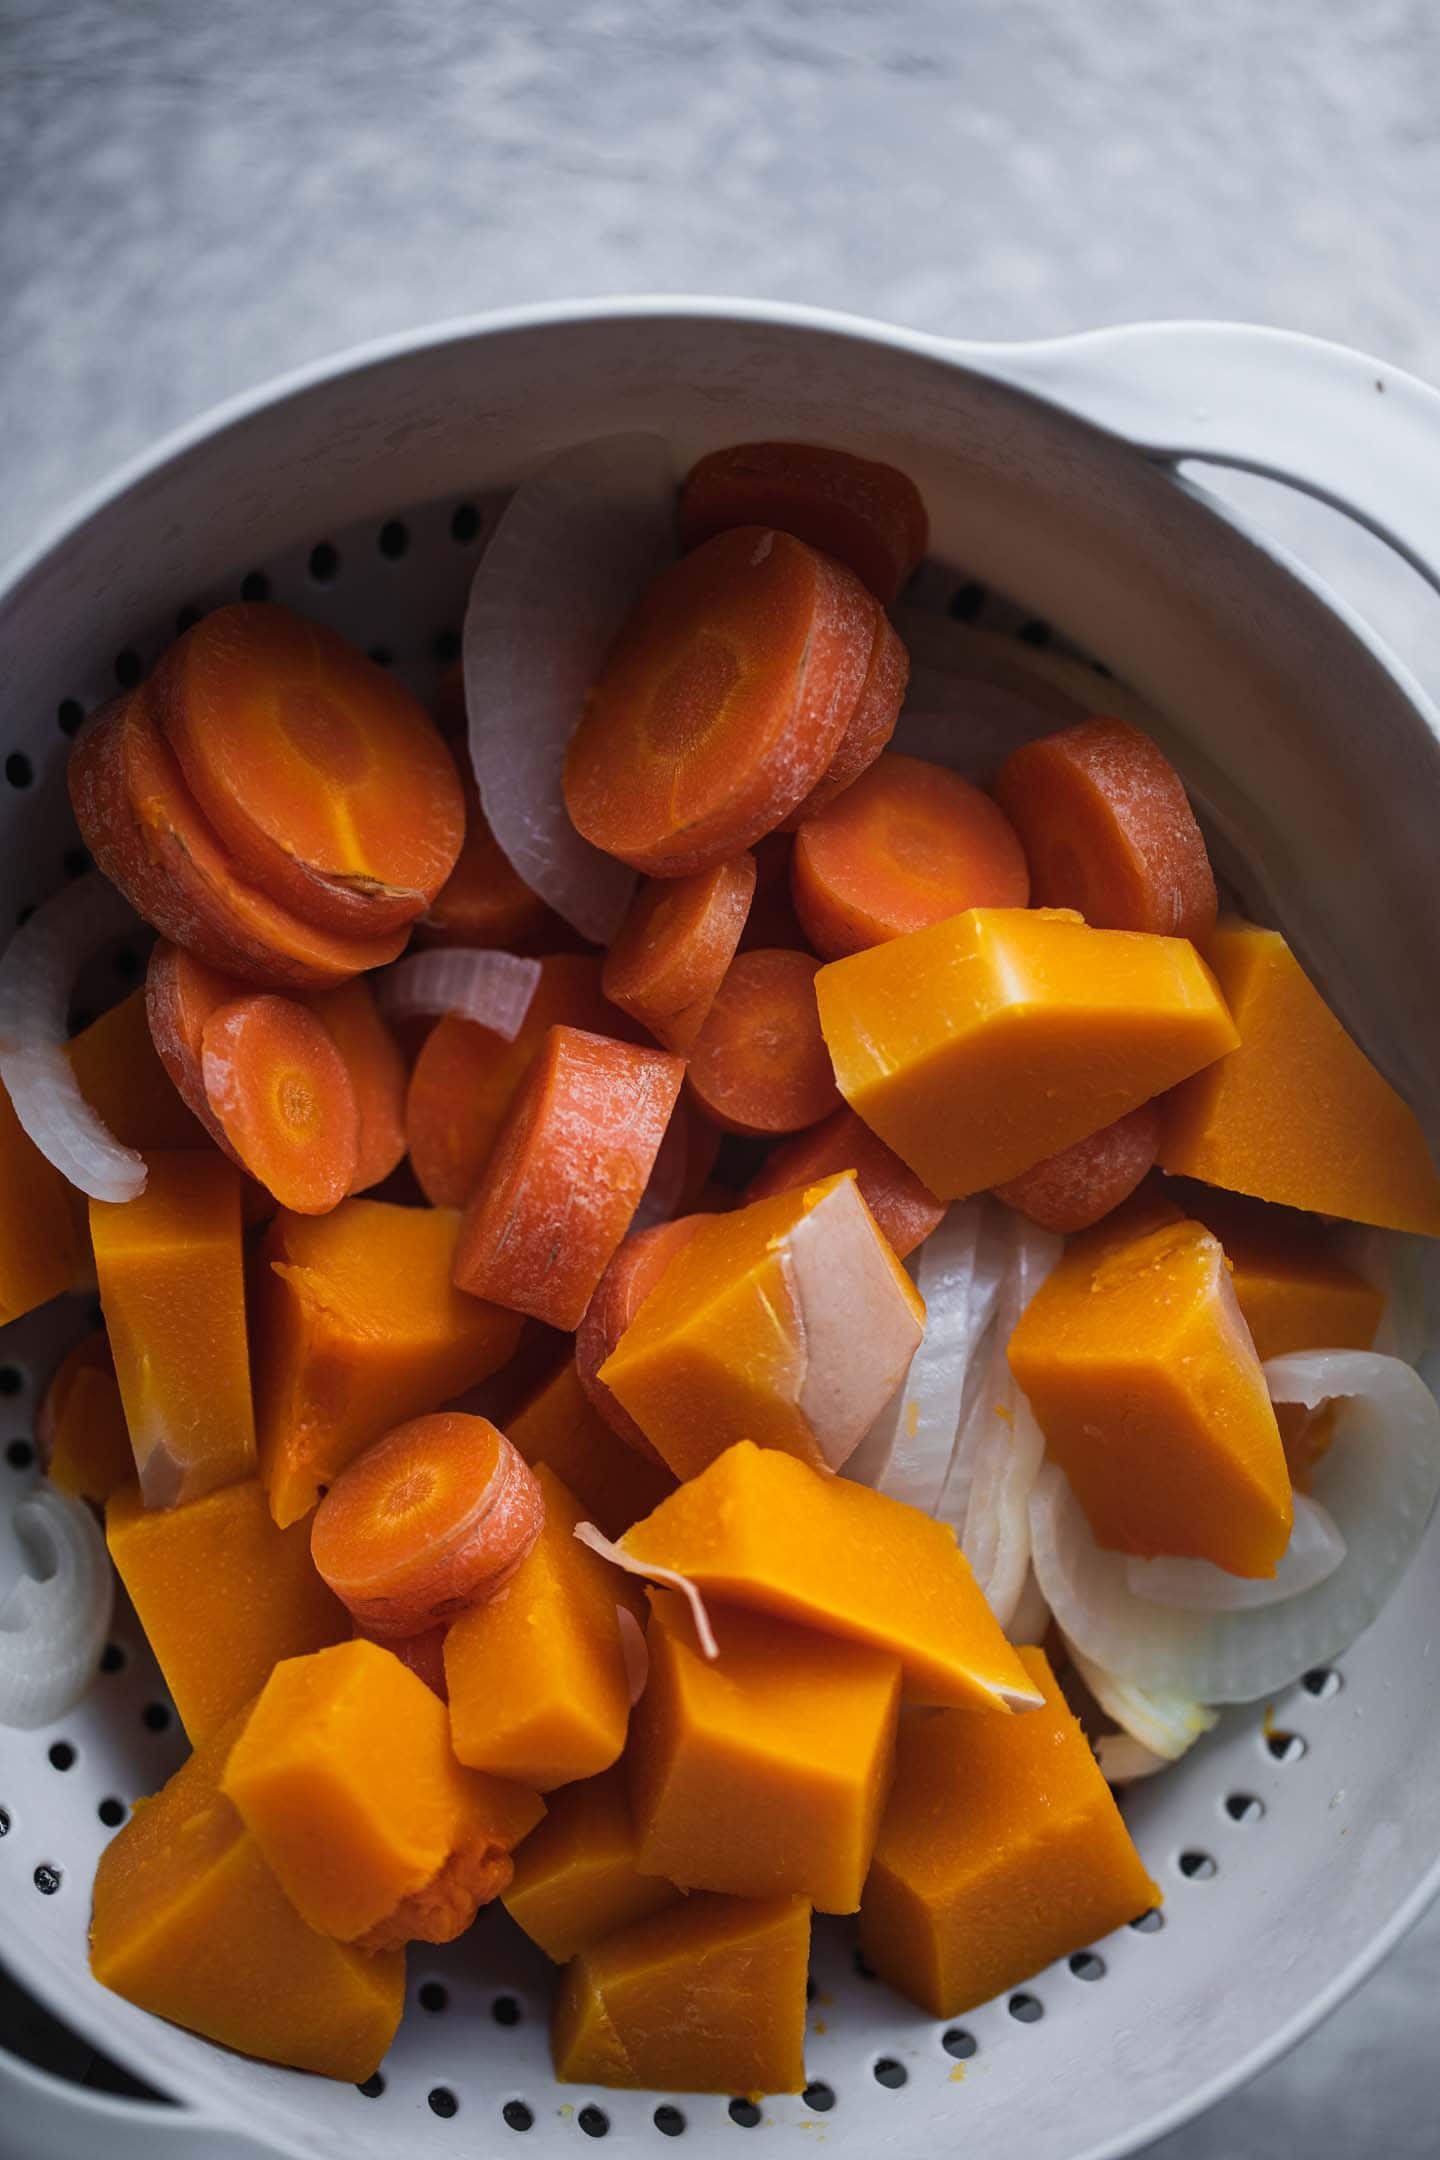 Cooked carrots, butternut squash and onions